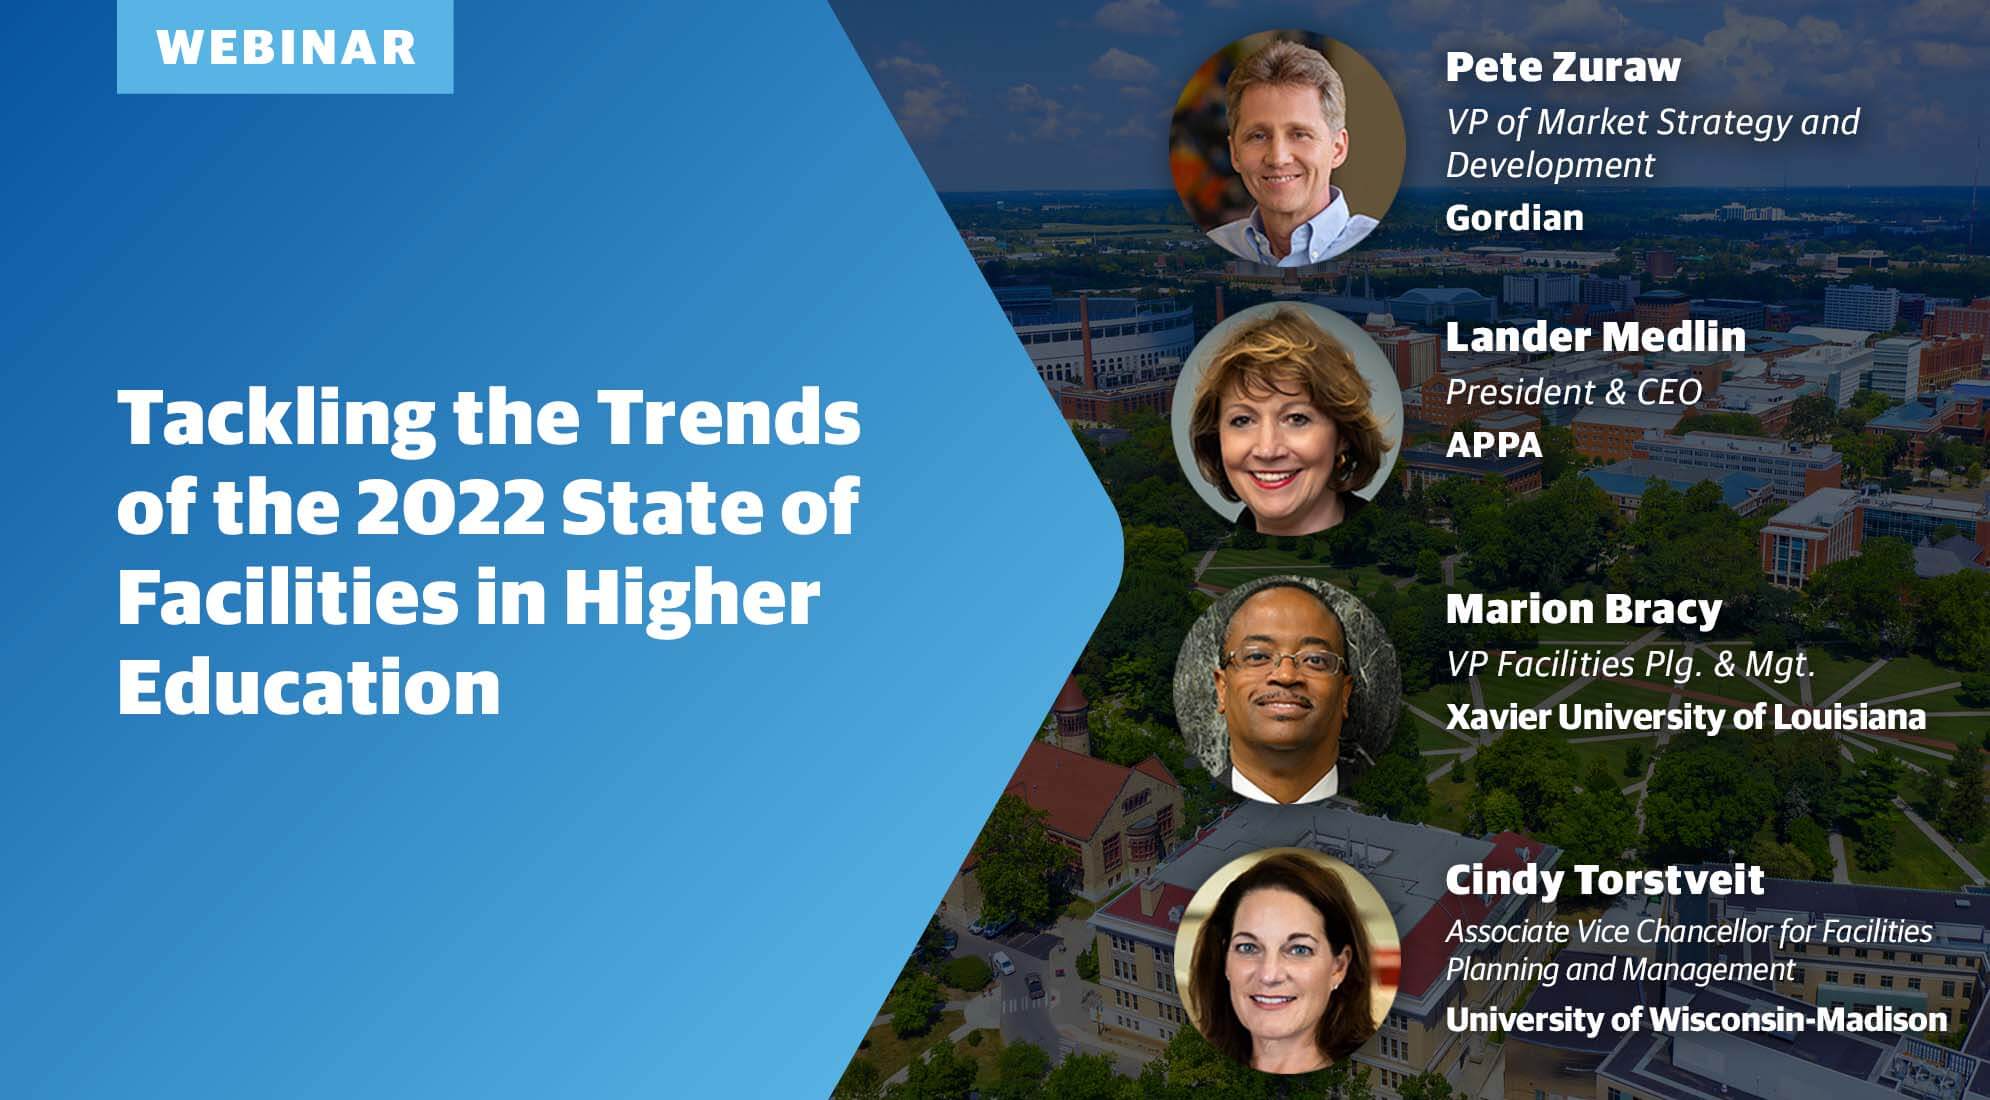 Tackling the Trends of the 2022 State of Facilities in Higher Education